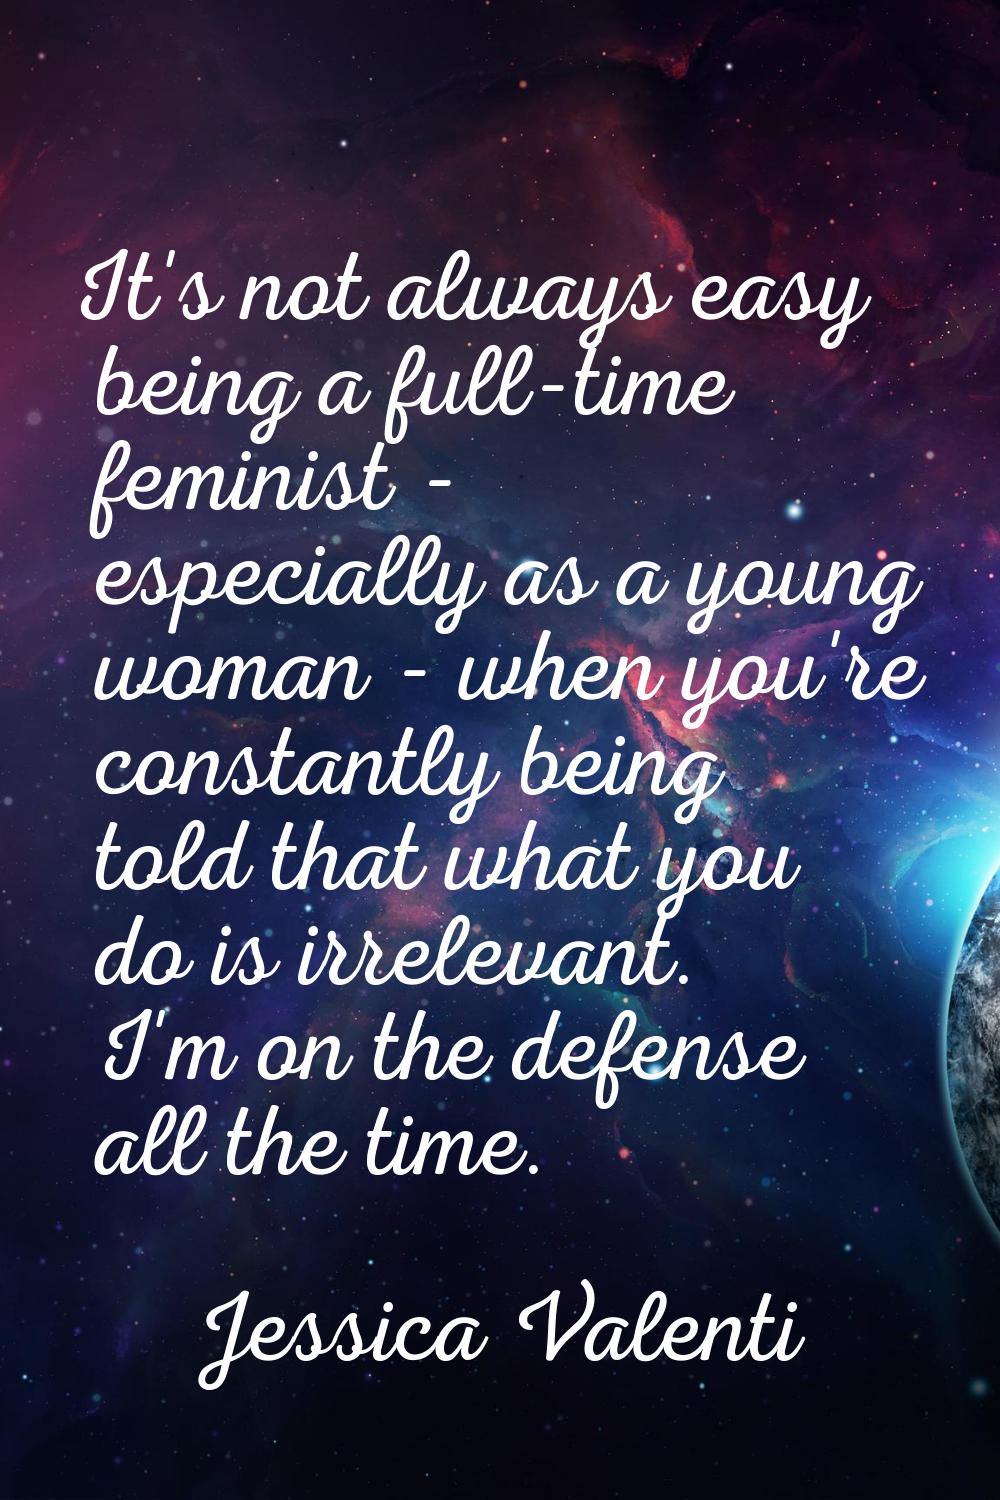 It's not always easy being a full-time feminist - especially as a young woman - when you're constan